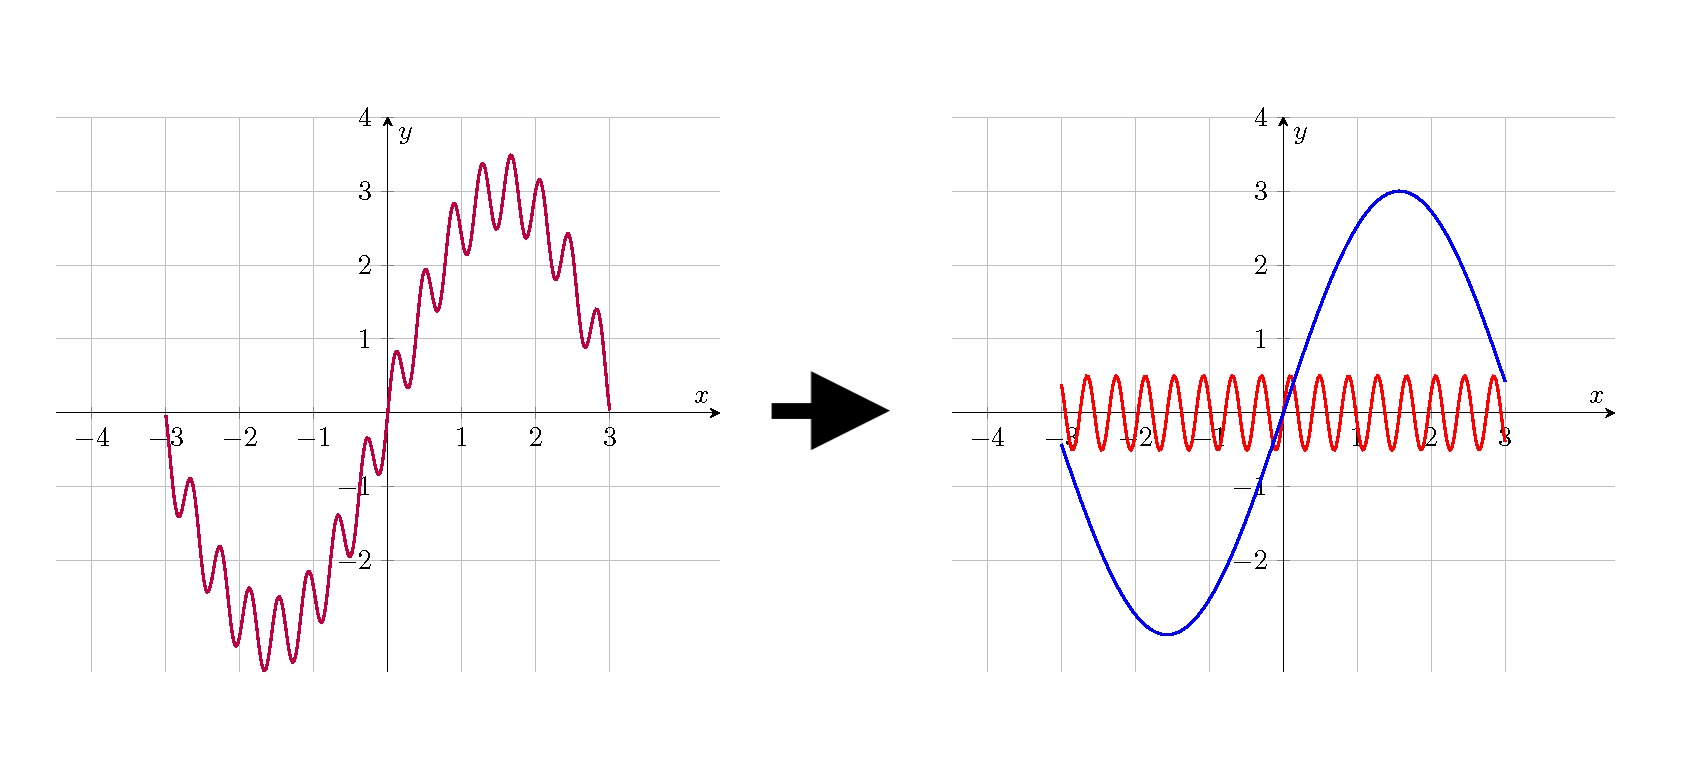 The Convergence of Fourier Series